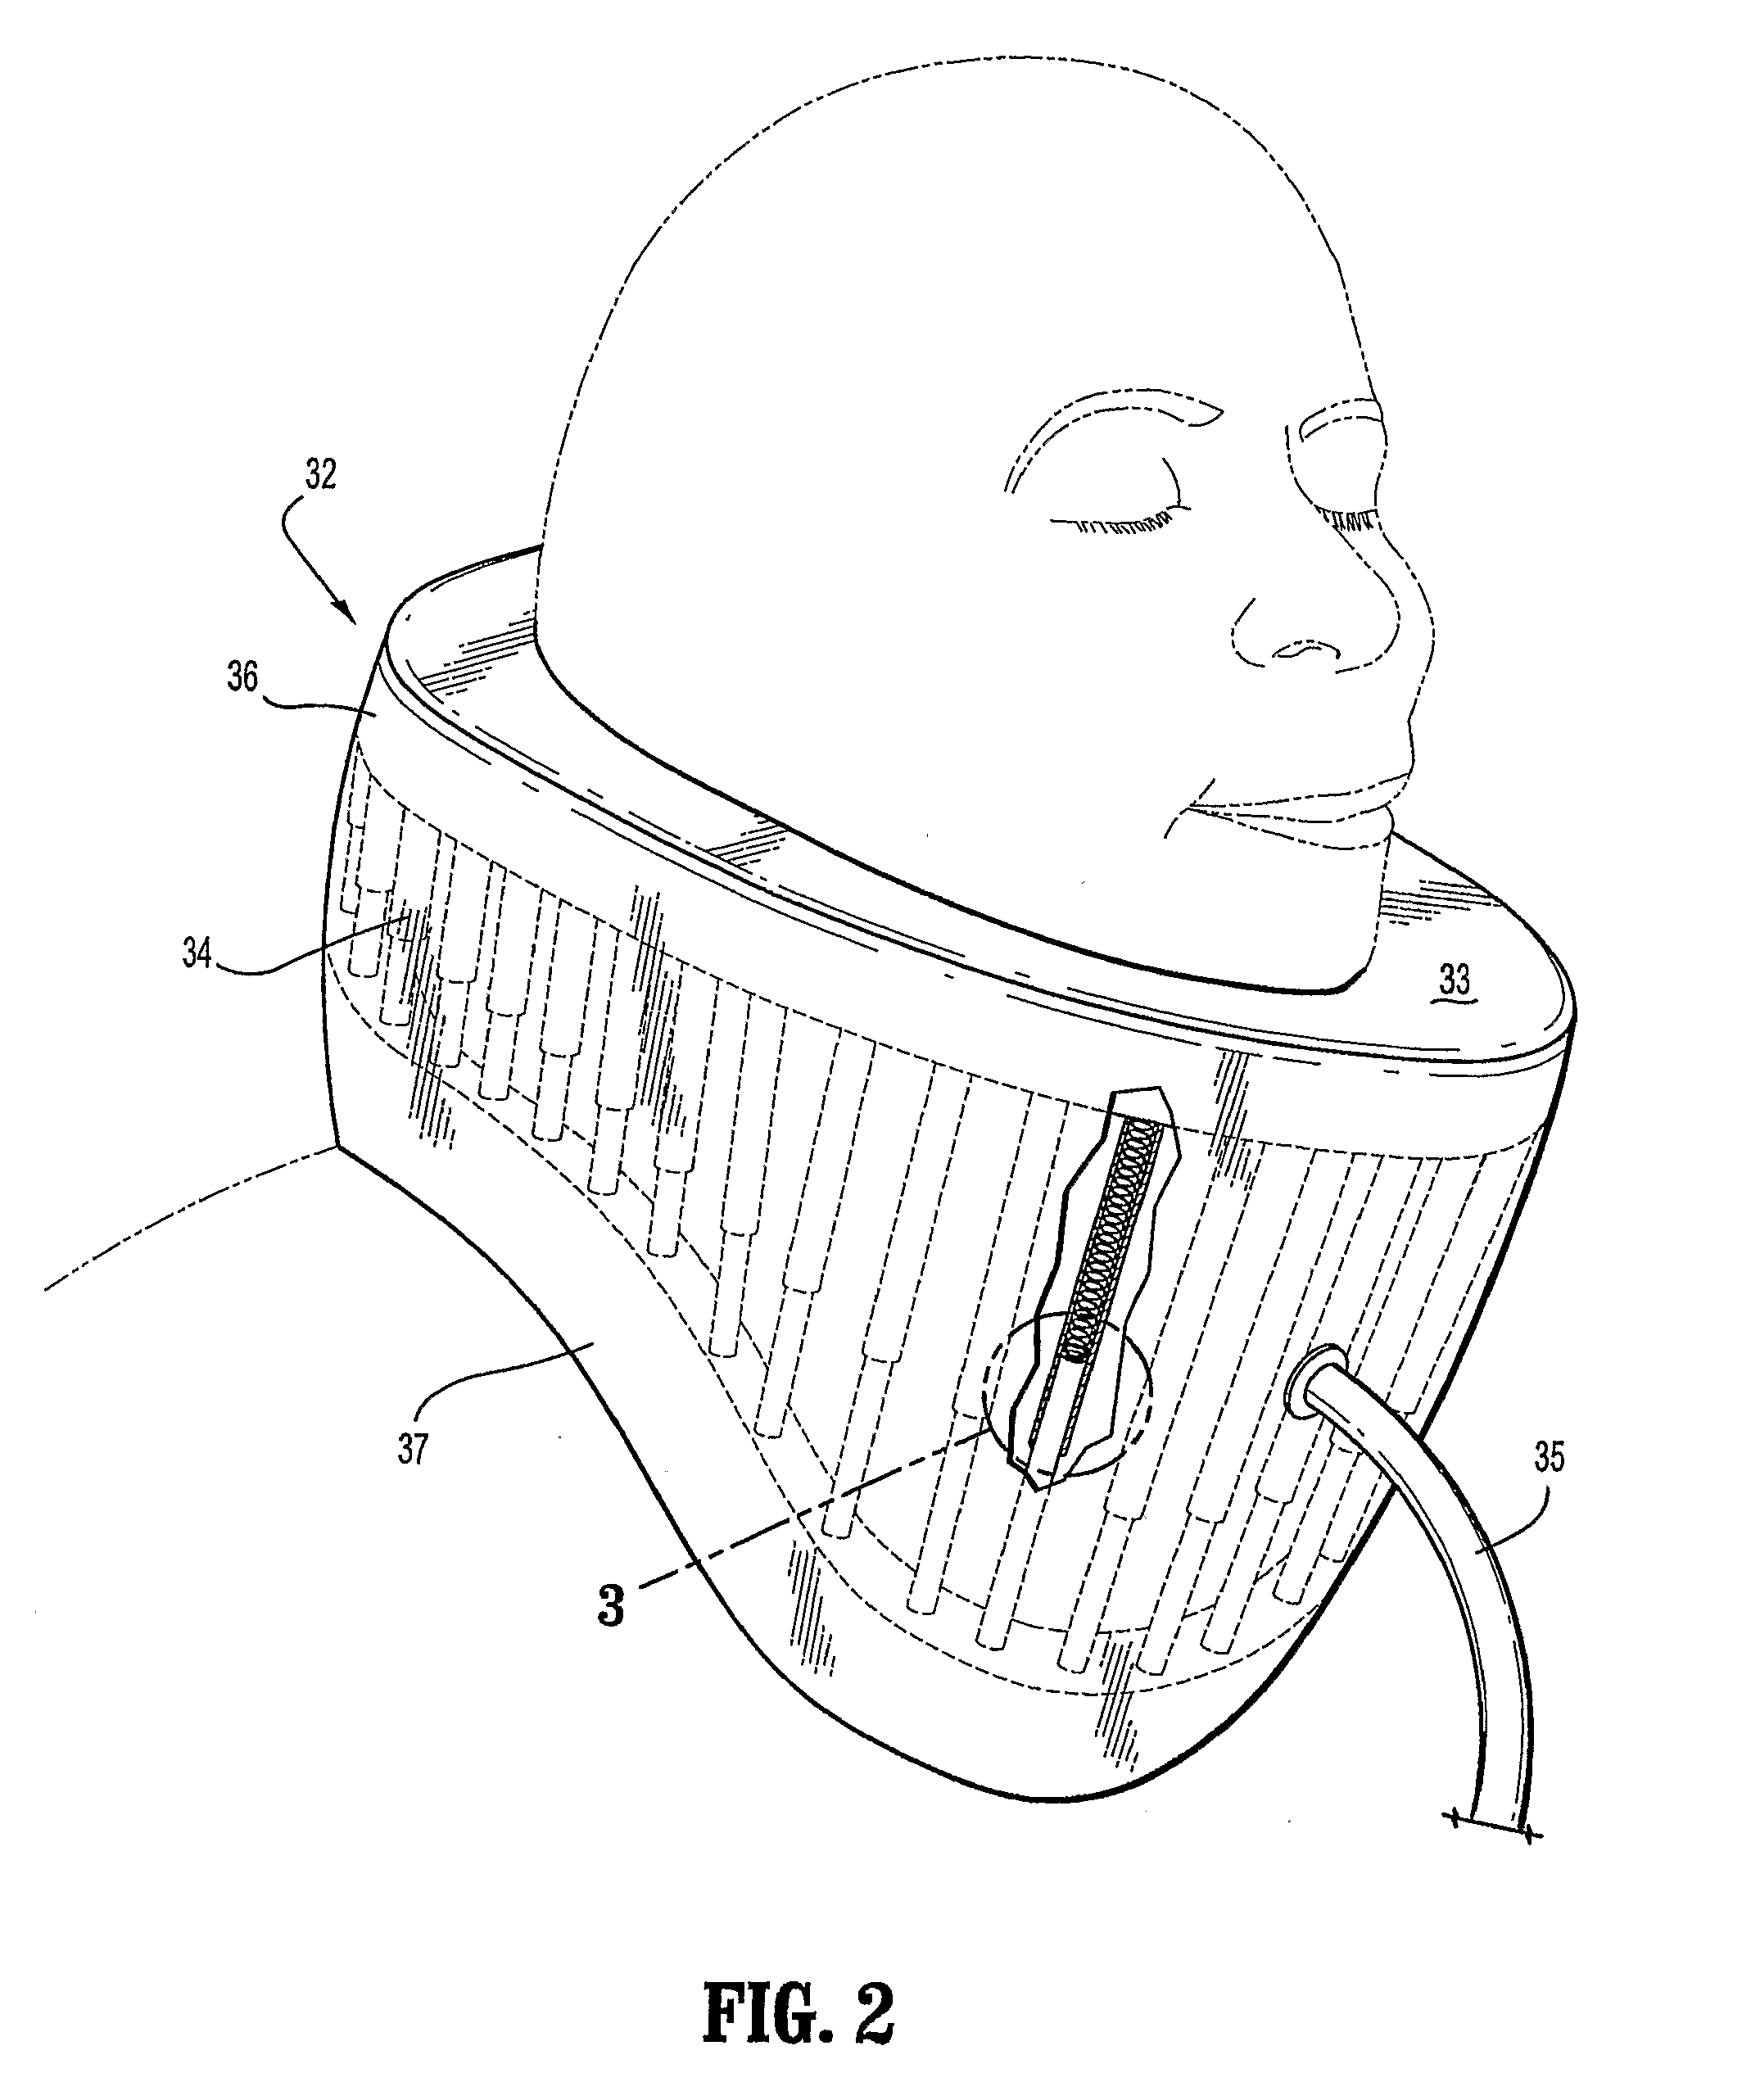 Therapeutic Cushioning and Devices for Assisting Respiration of and administering fluid to a patient